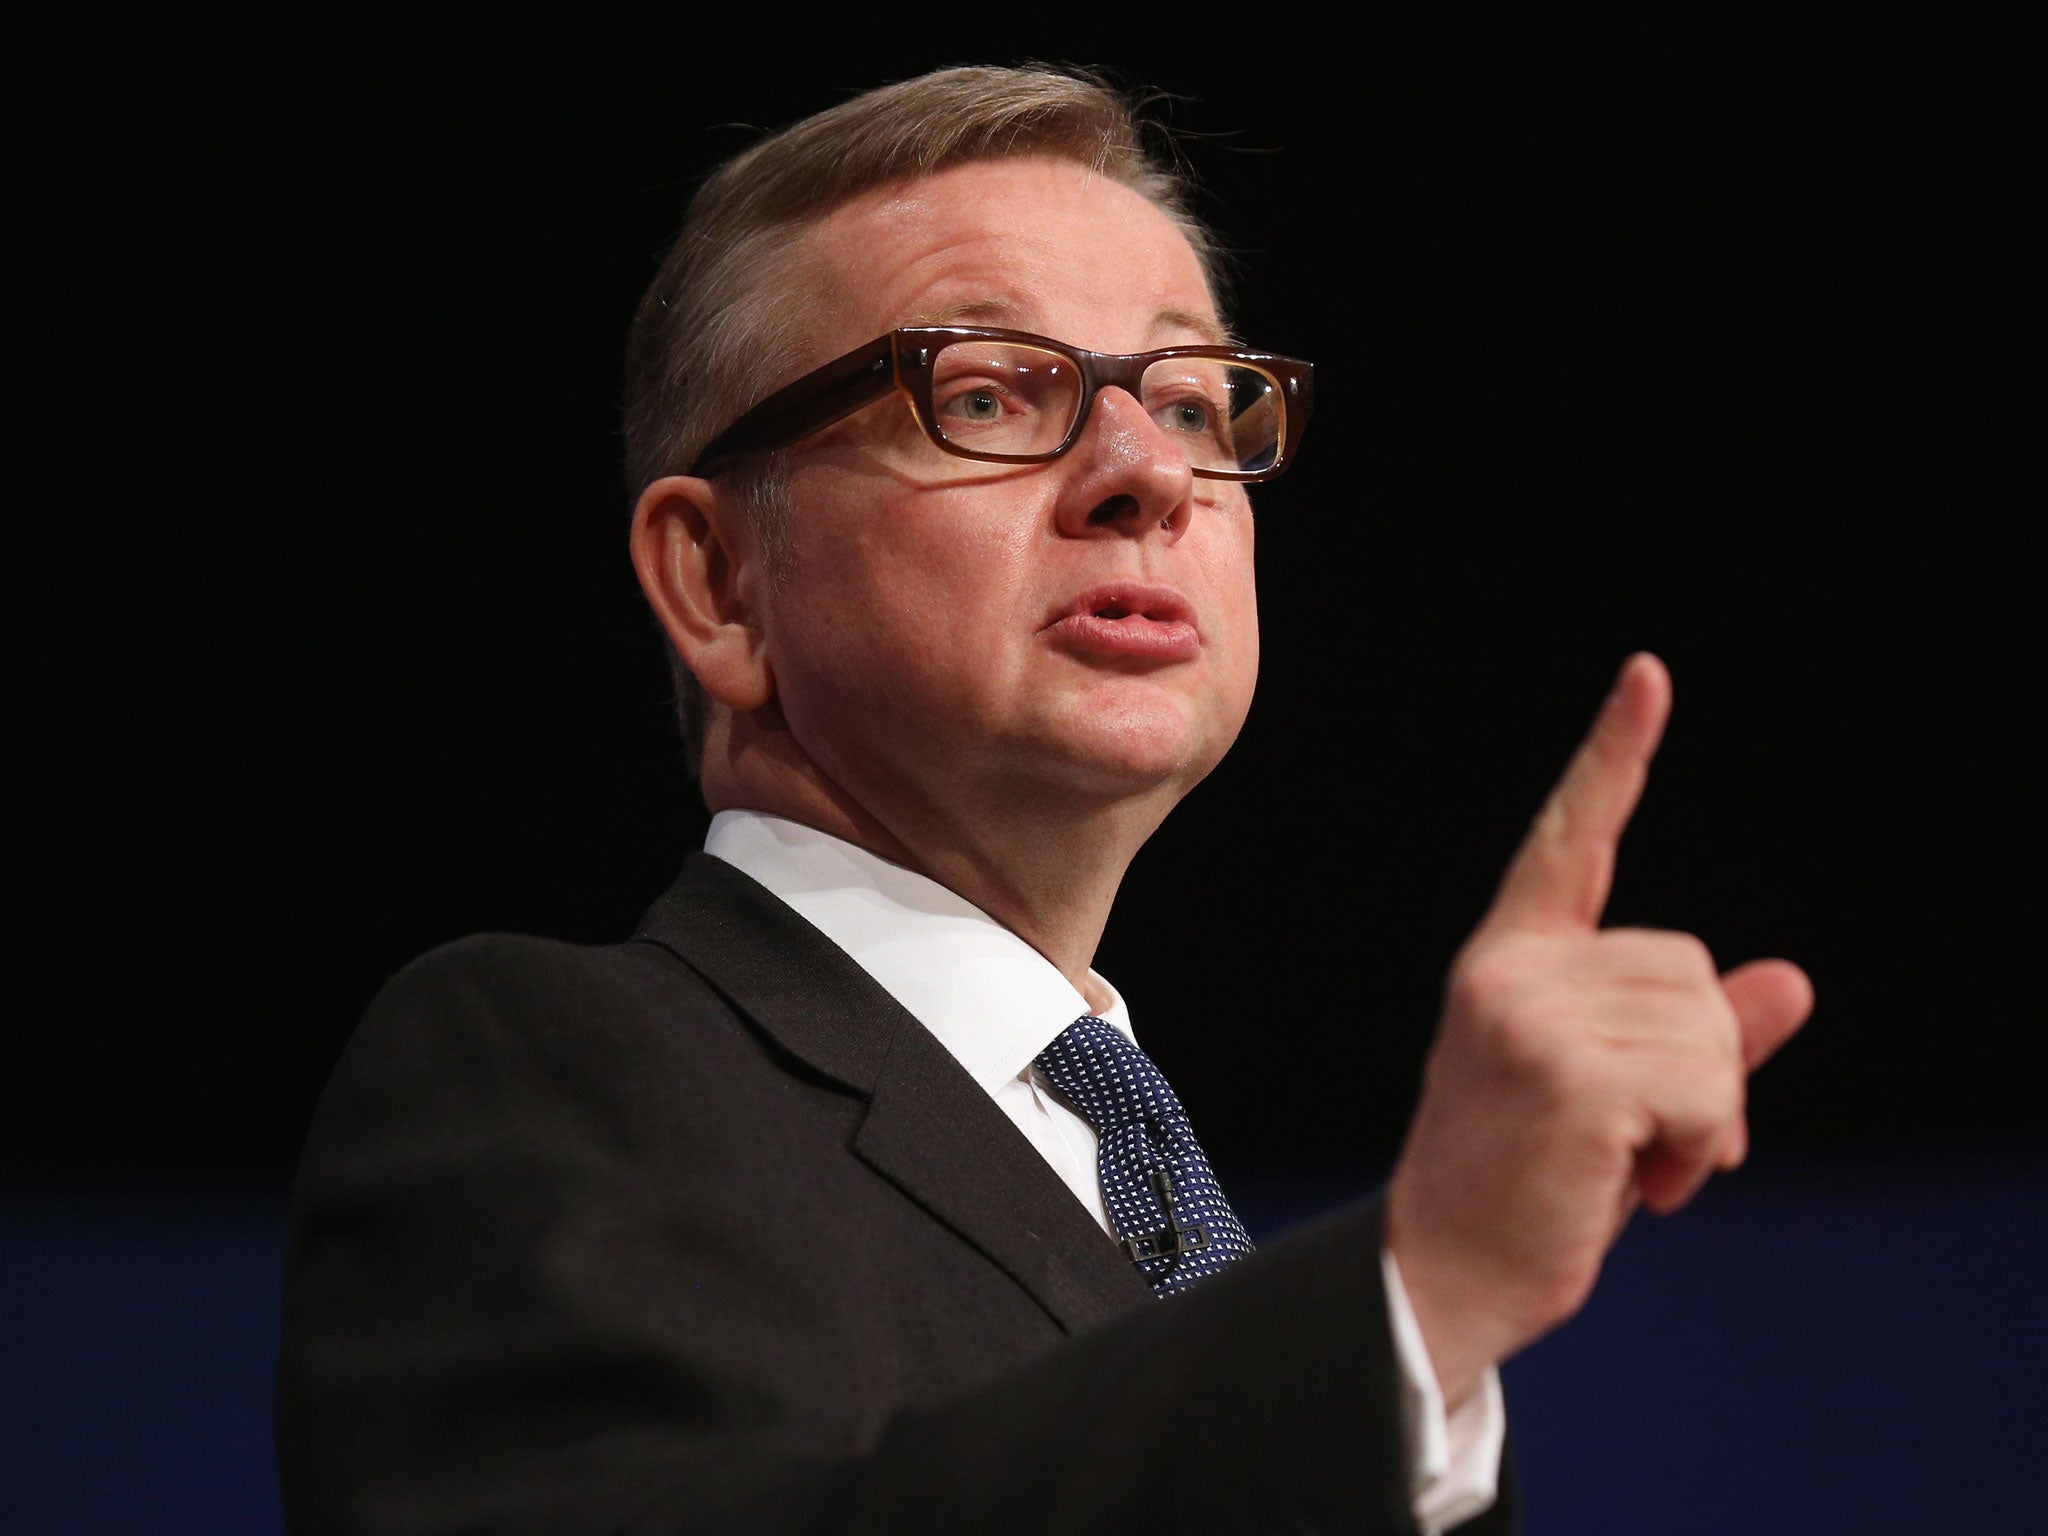 Michael Gove shouted 'disgrace, you're a disgrace' at Conservative and Liberal Democrat rebels last night